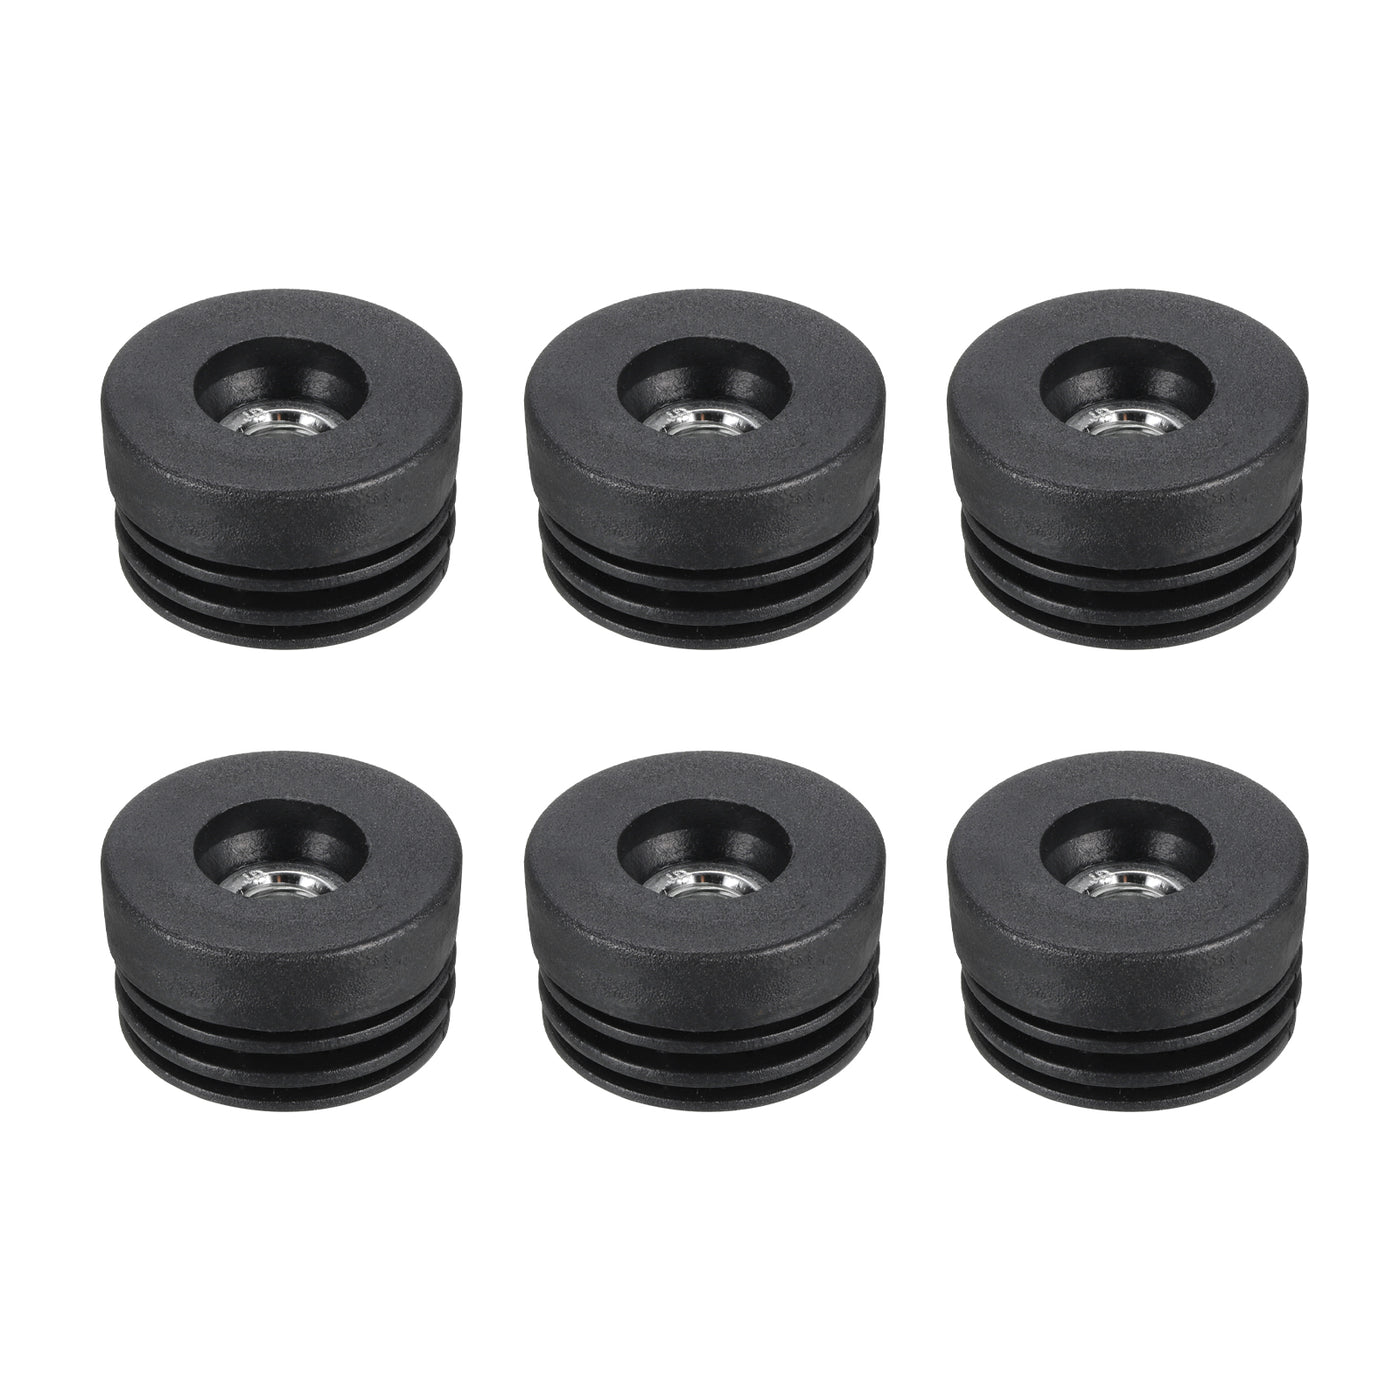 uxcell Uxcell 6Pcs Caster Insert with Thread, 38mm/1.5" M10 Thread for Furniture